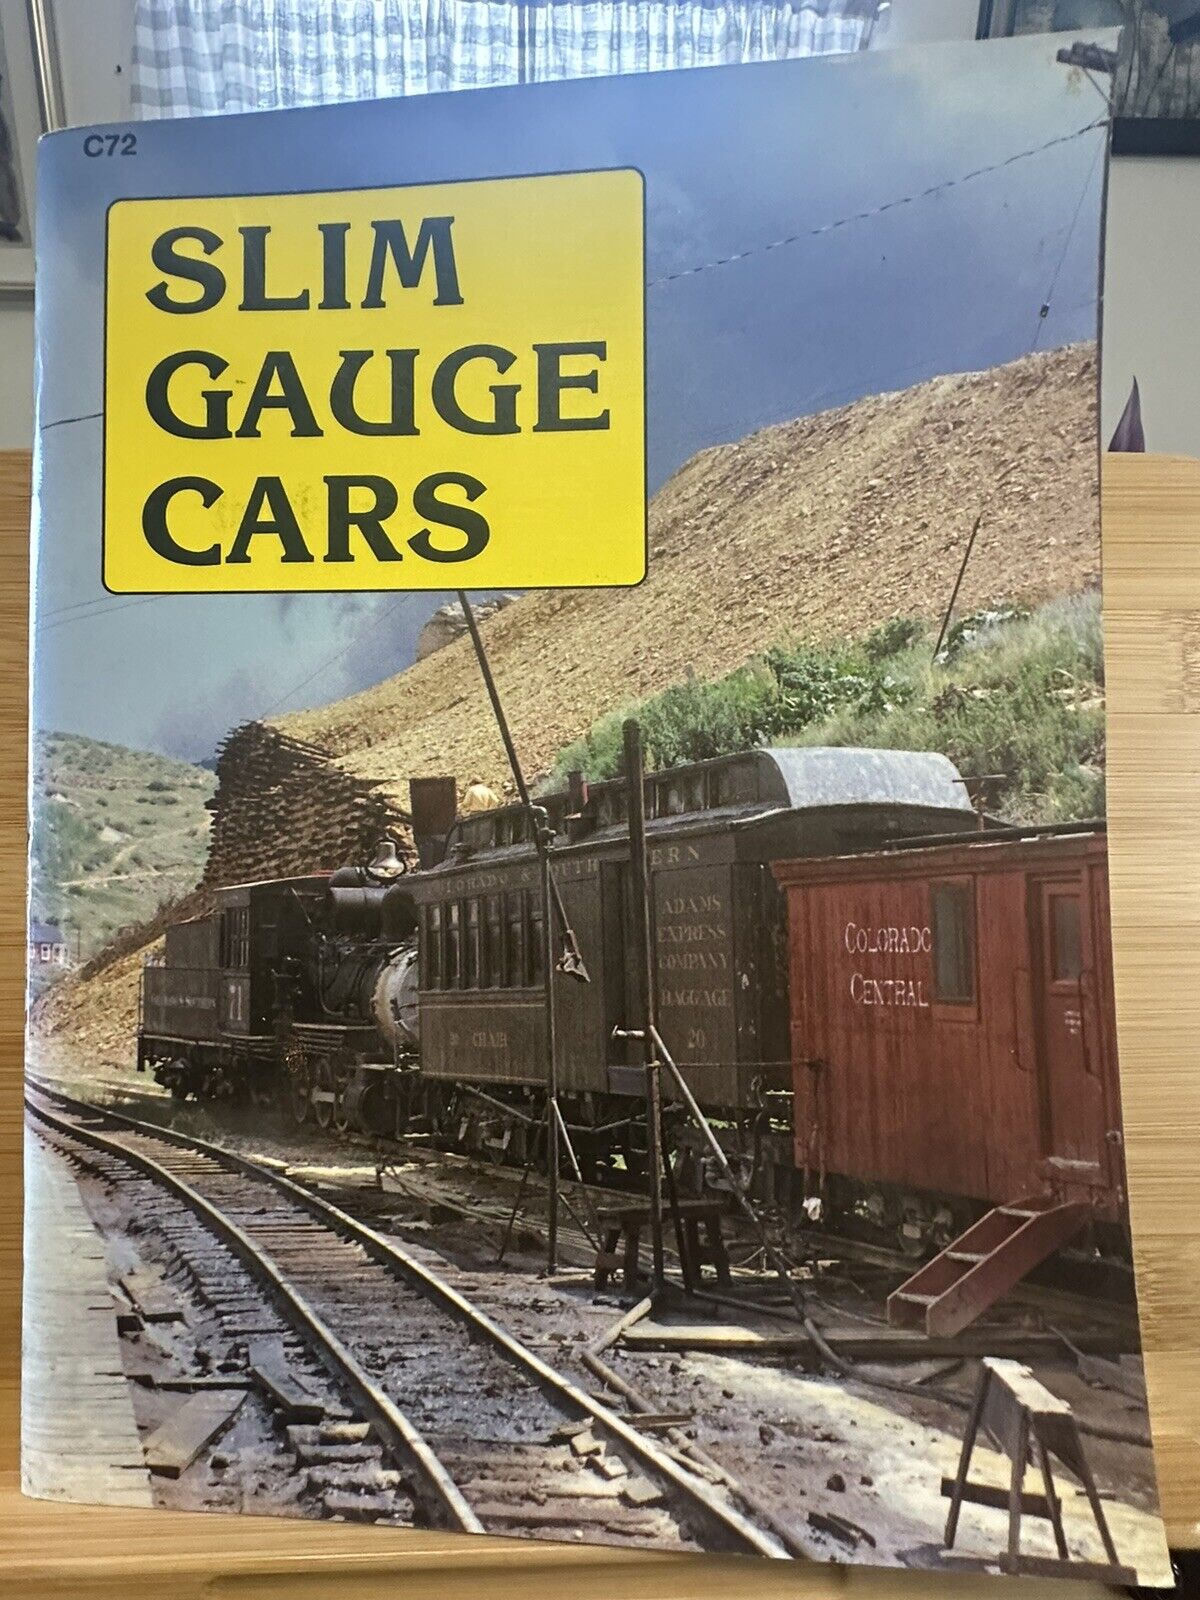 Slim Gauge Cars-by Carstens Publications Inc. - Published in 1991